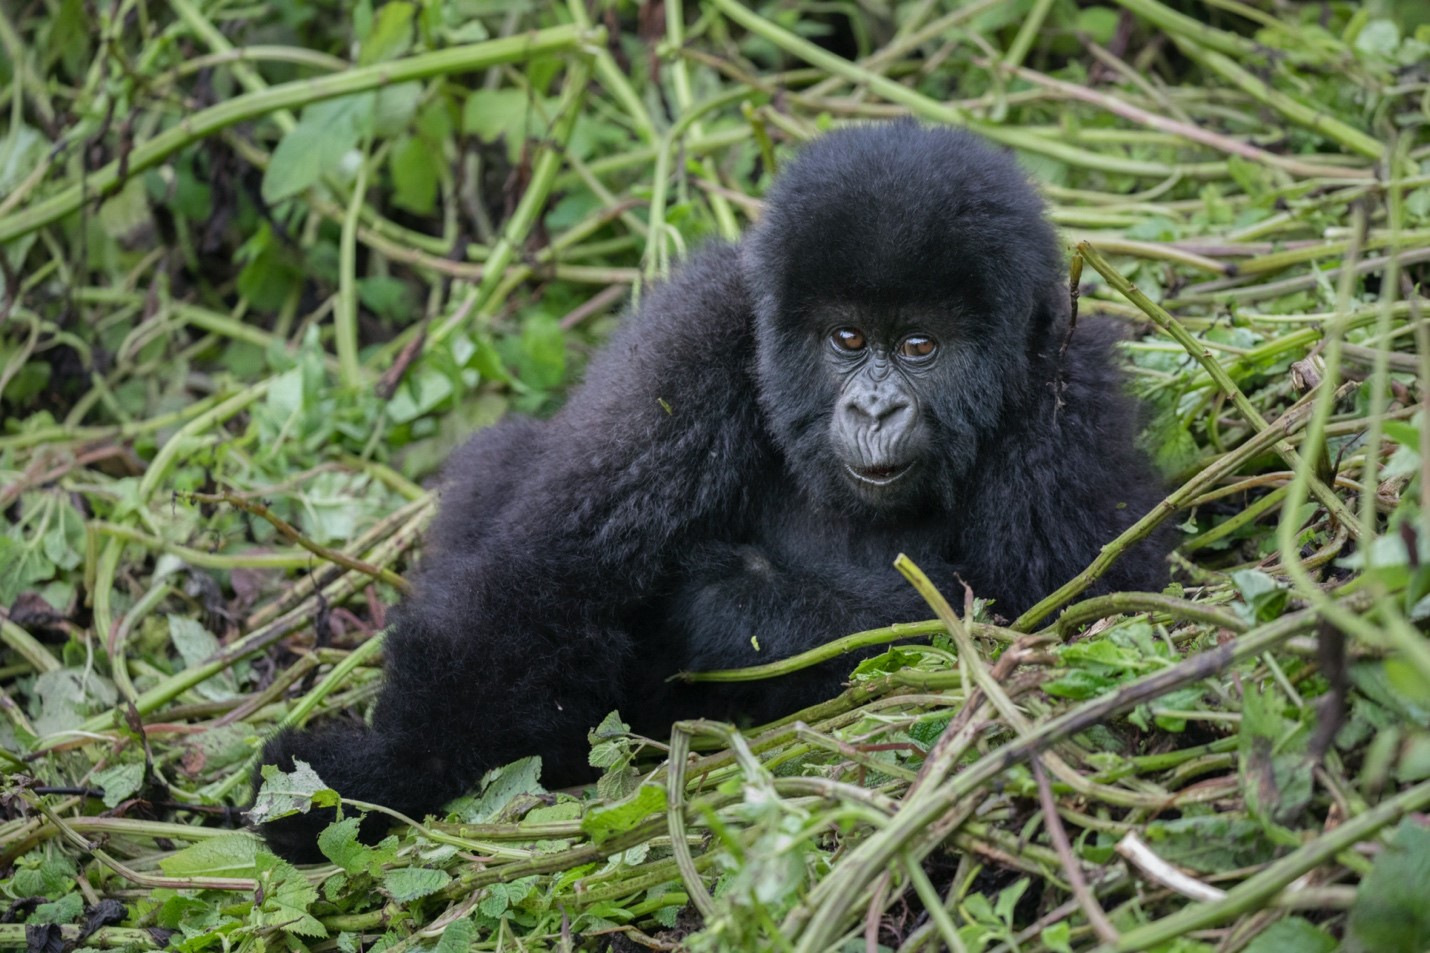 a baby gorilla poses for a photograph with a tangle of vines around it